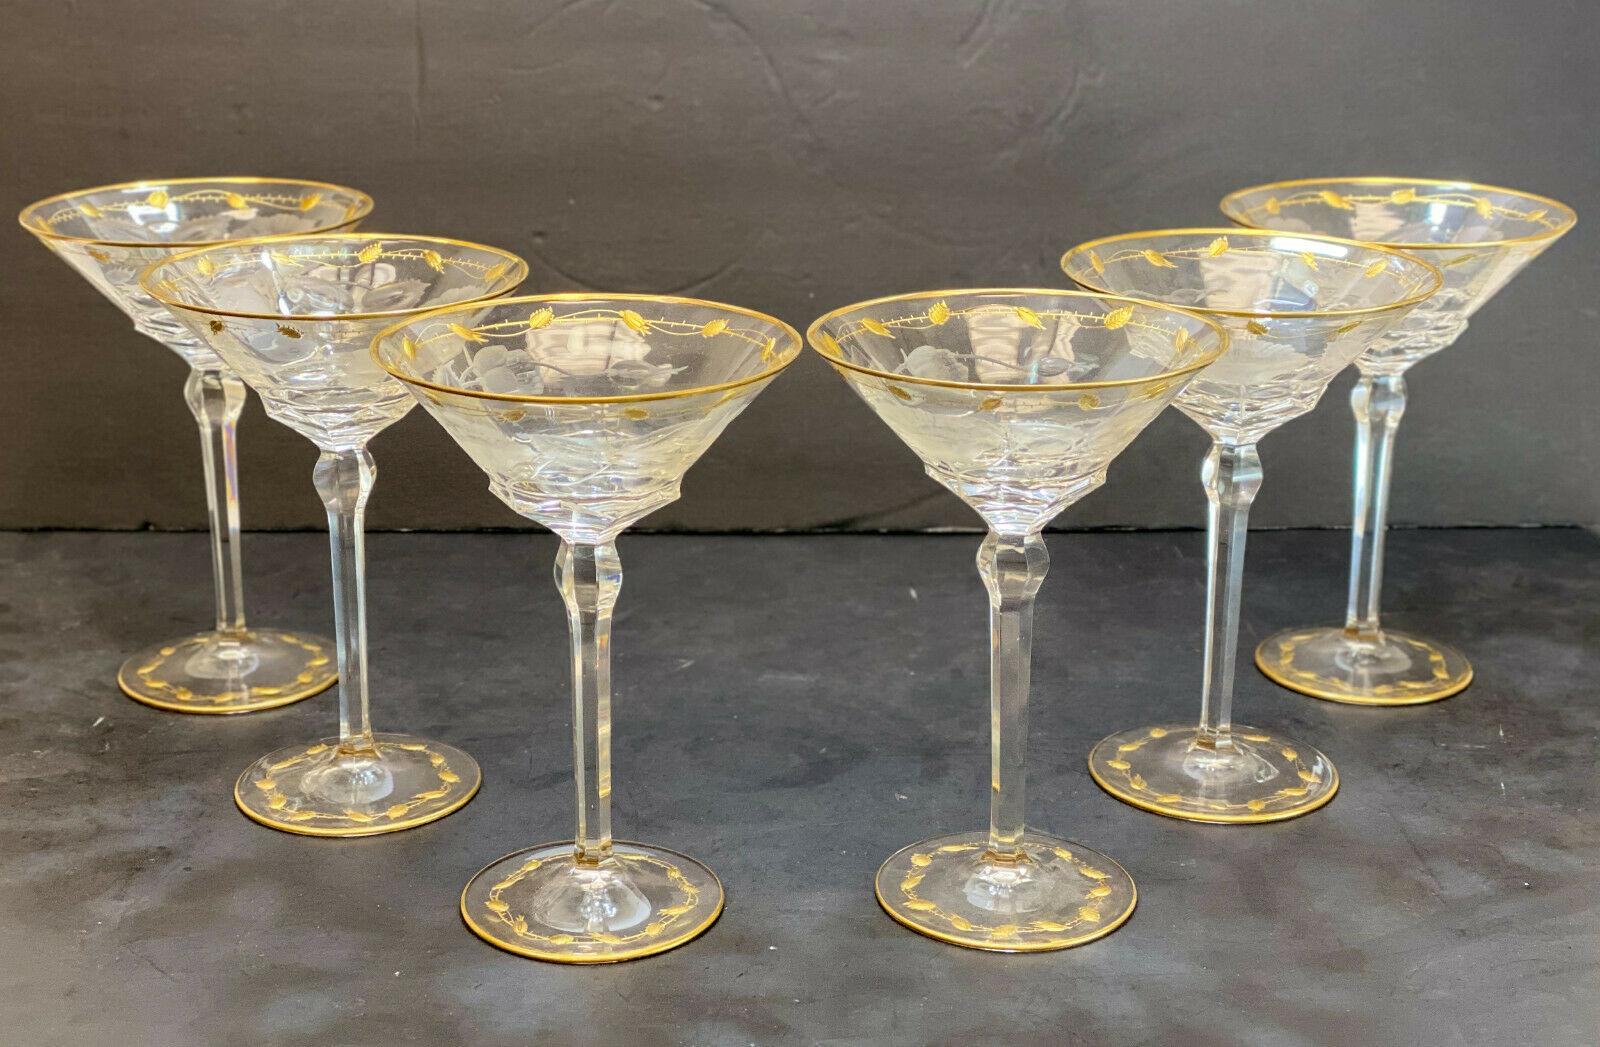 European Moser Cut Glass and Gilt Drink-Ware Service Goblets in Paula Service for 6 For Sale